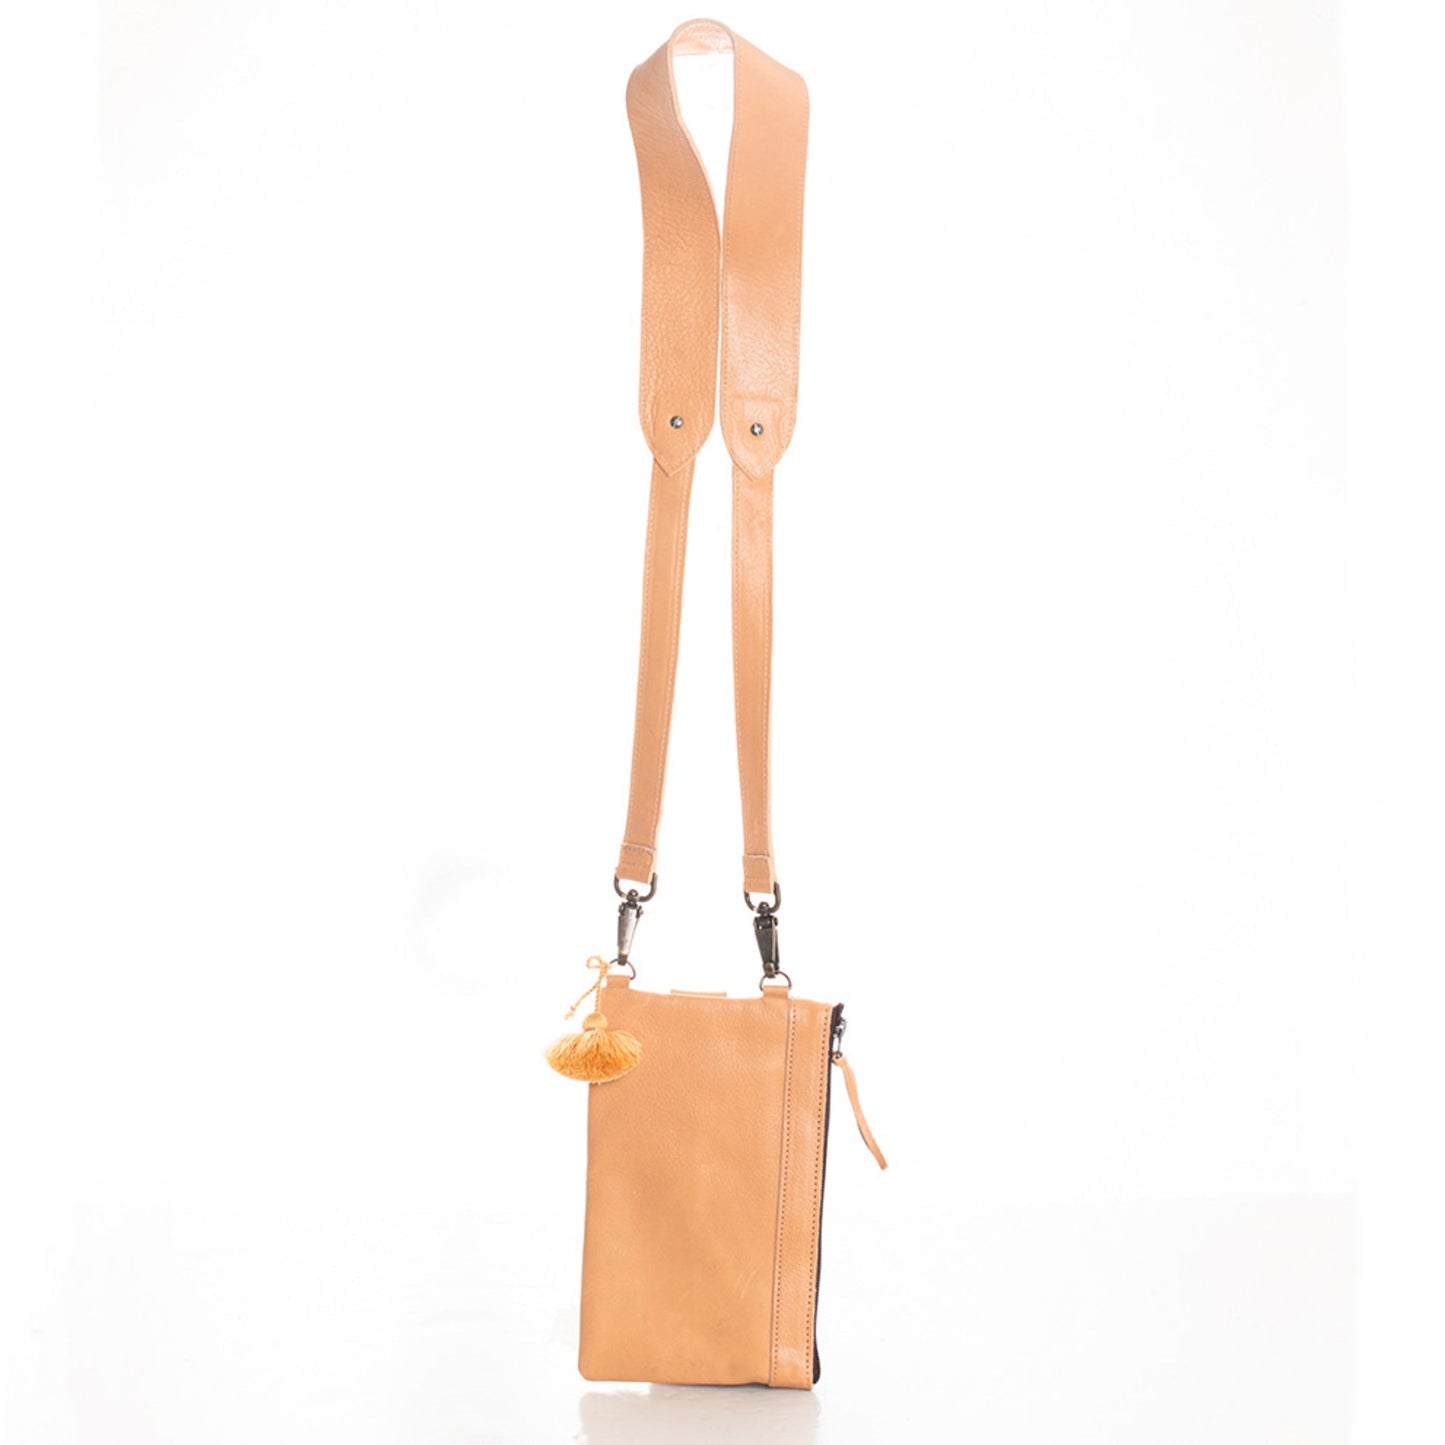 THE EVERYTHING CLUTCH + UTILITY STRAP SET - FULL LEATHER COLLECTION - SANDSTONE